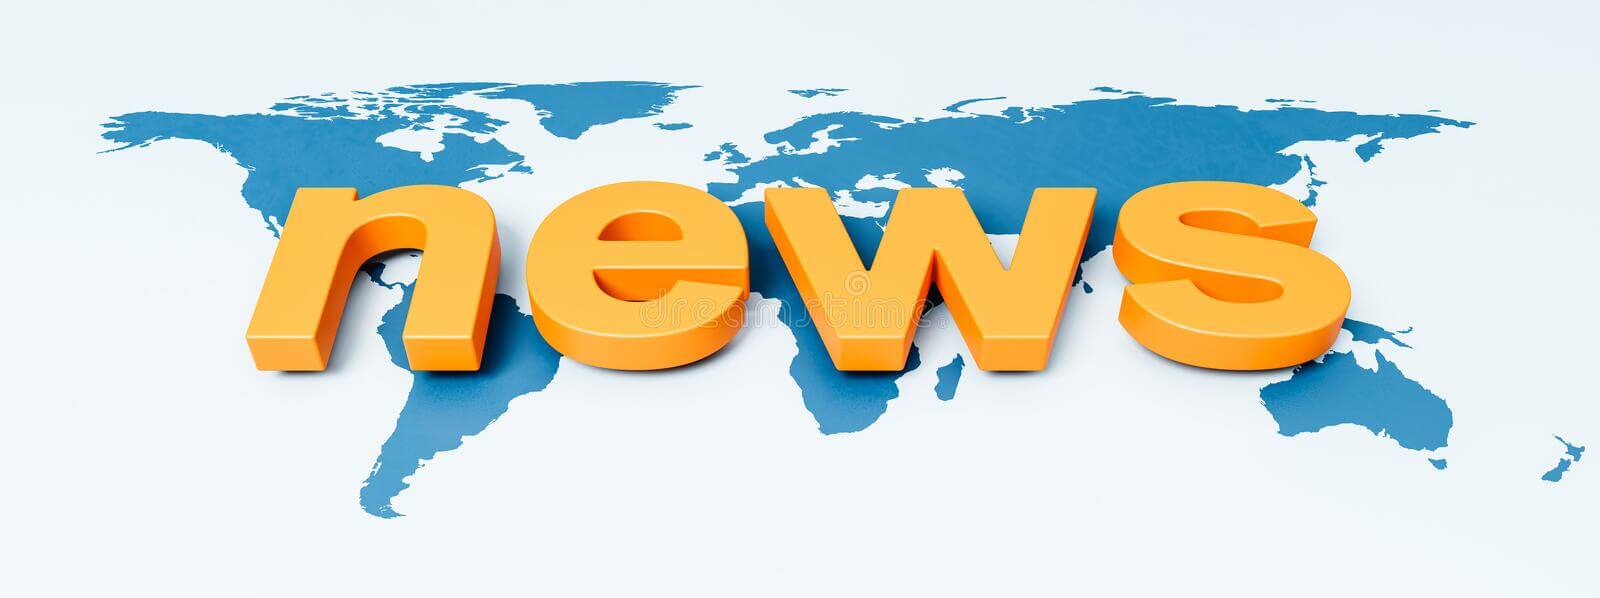 stay tuned with us to have a latest News from PDL world.